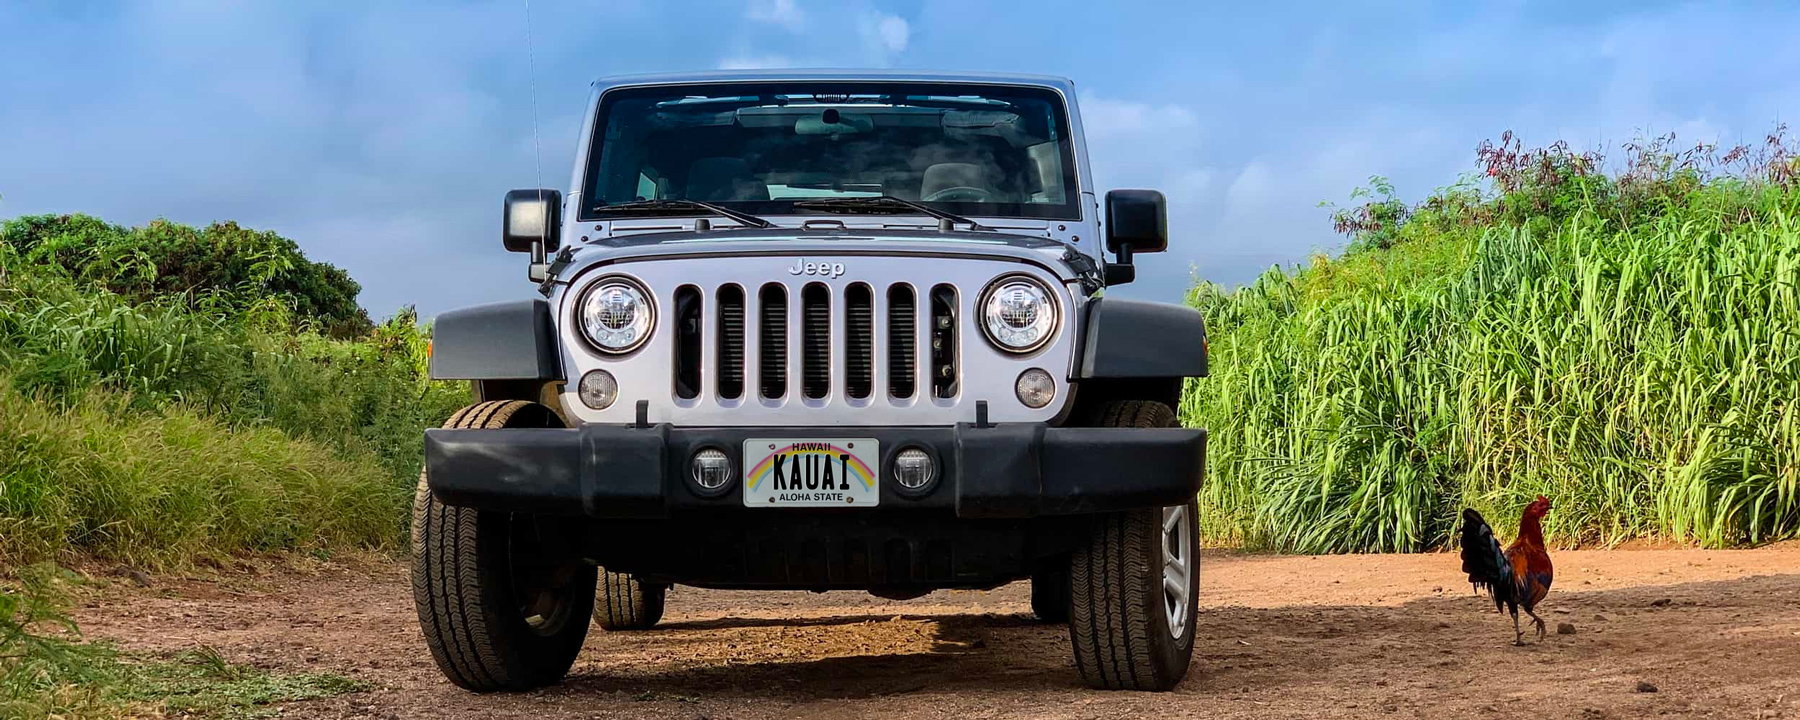 Jeep parked in front of the entrance sign to the Kauai Airport in Lihue (LIH)